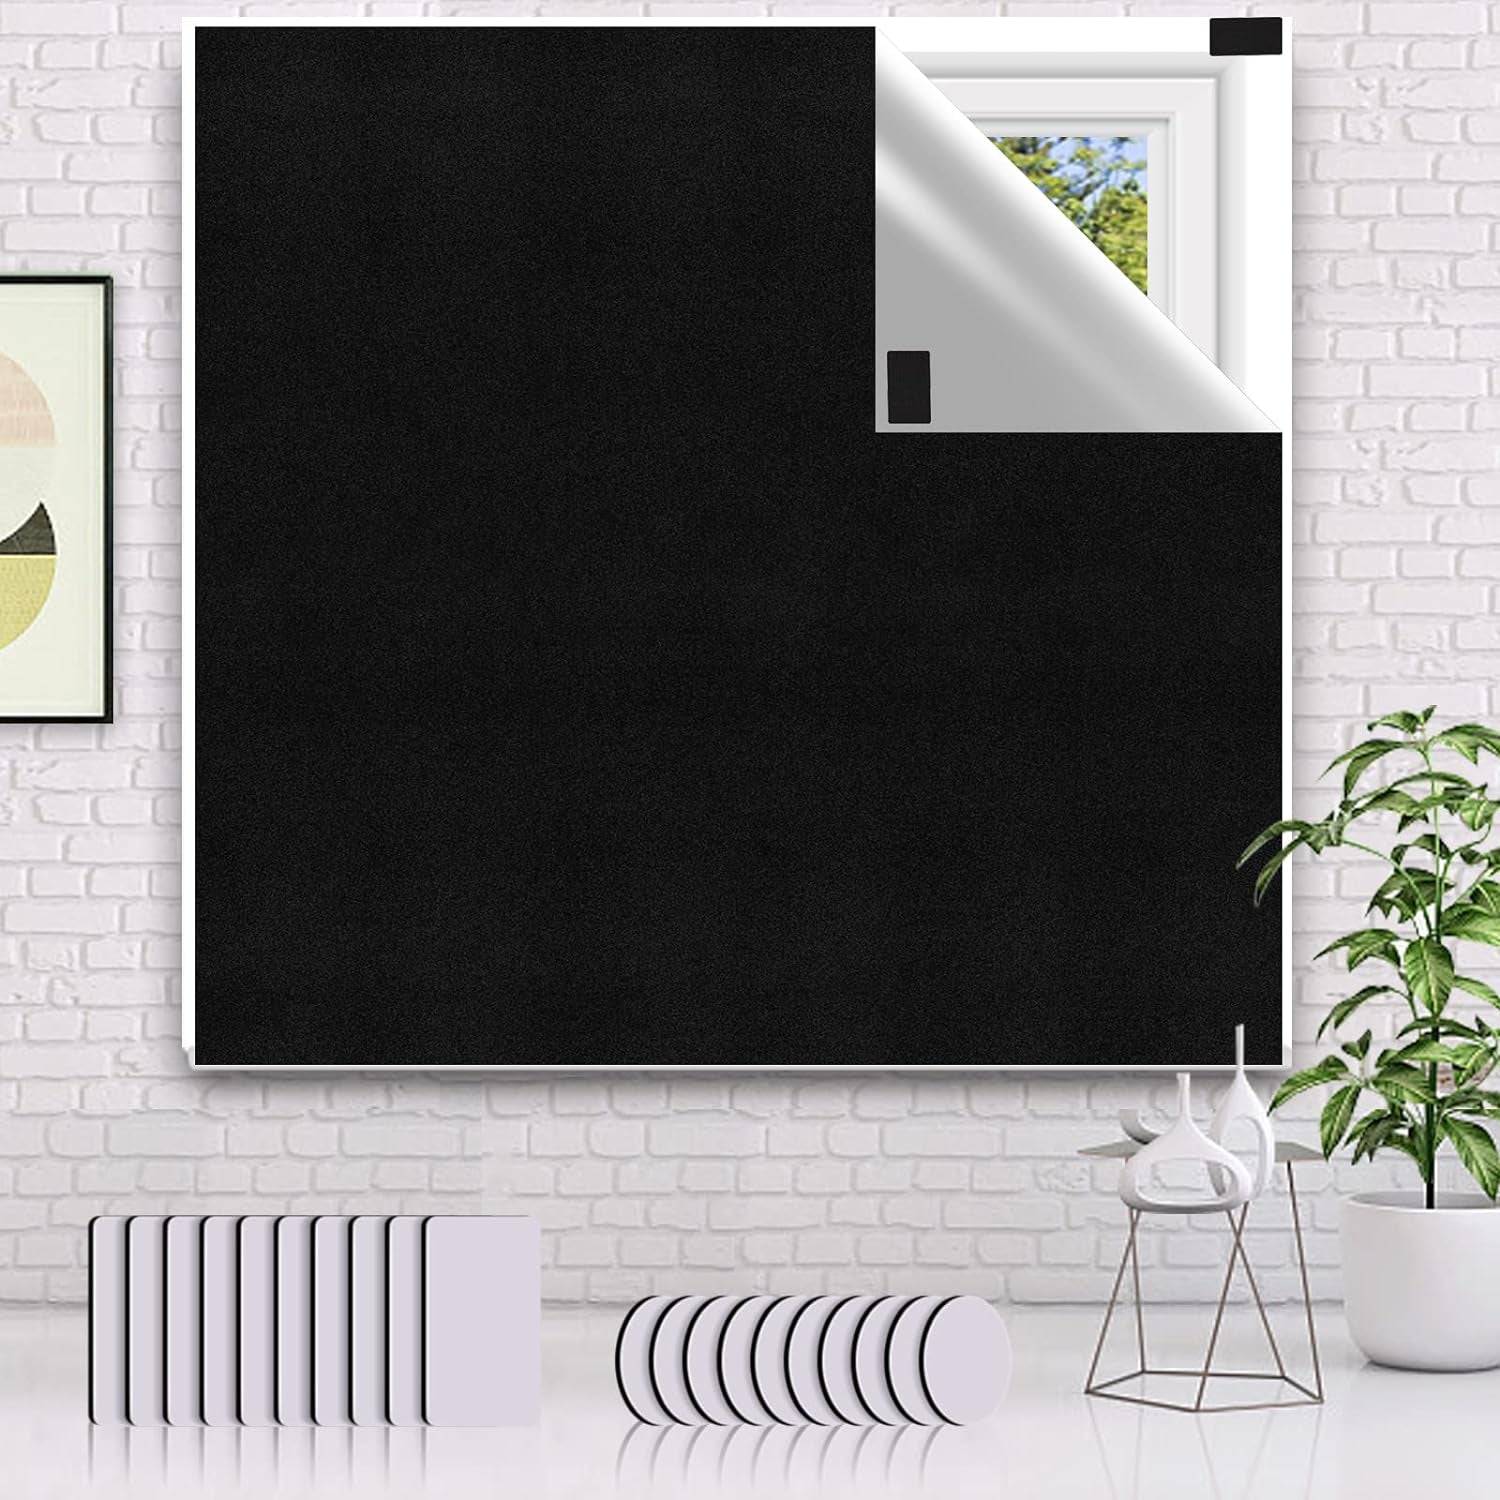 Blackout Blinds 100% Blackout Material, Portable Blackout Shades 145X200Cm, DIY Cut to Any Size or Shape Blackout Blinds for Windows Bedroom Nursery Loft Travel RV Car